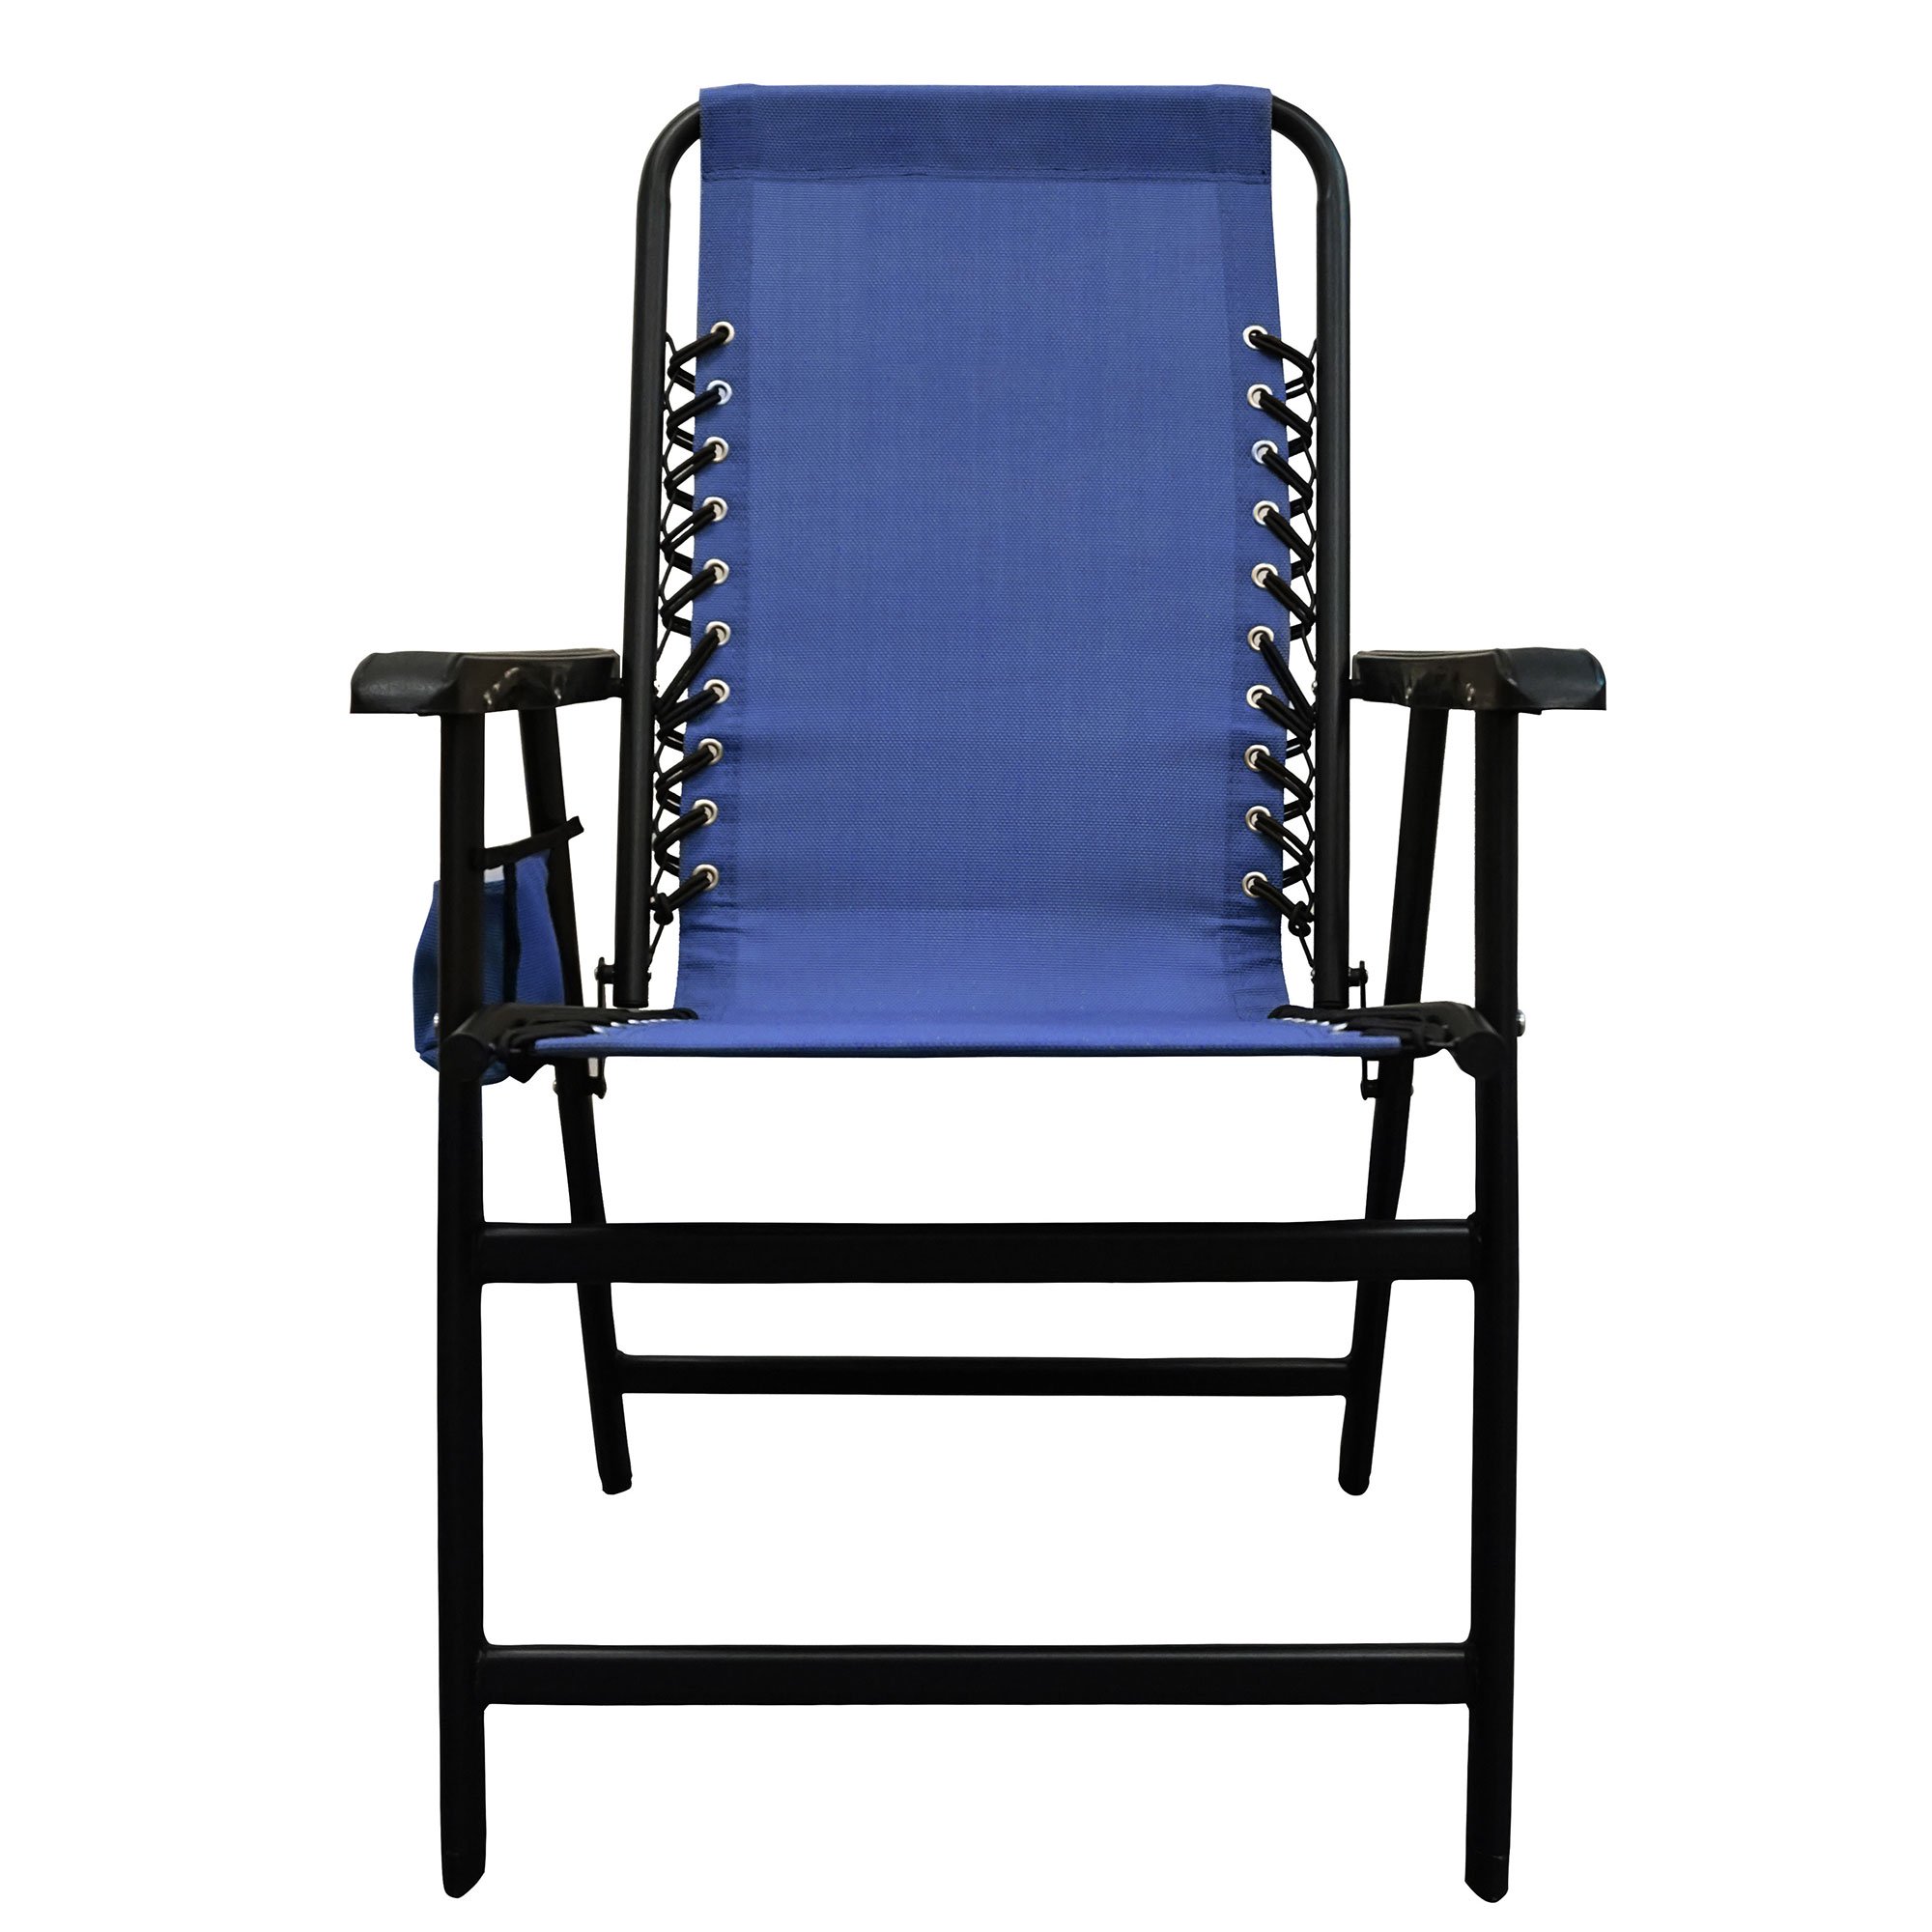 Caravan Canopy Infinity Suspension Folding Chair with Cupholder, Blue (2 Pack) - image 5 of 5